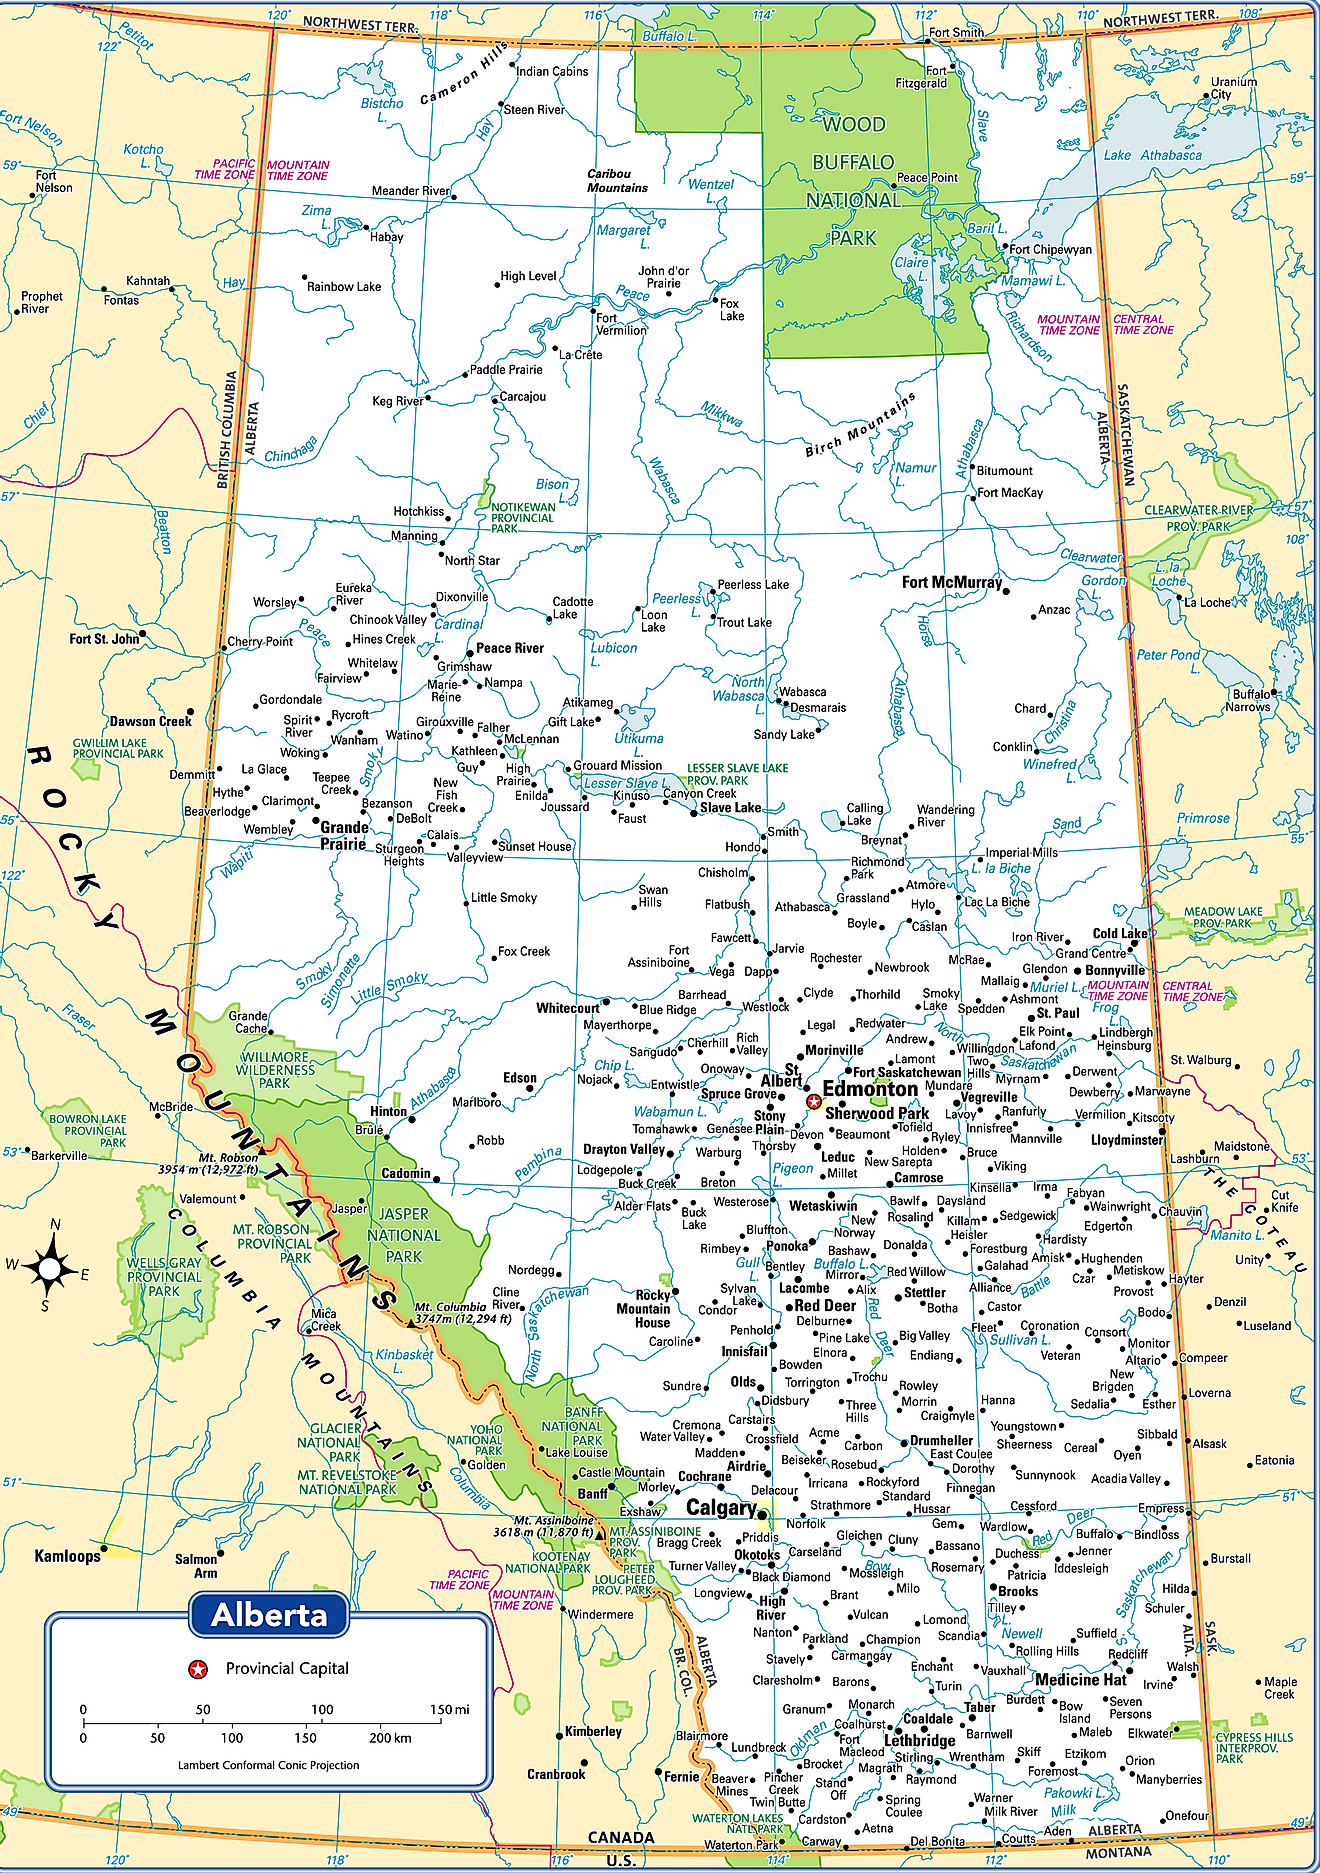 Administrative Map of Alberta showing its various cities/towns including its capital city - Edmonton